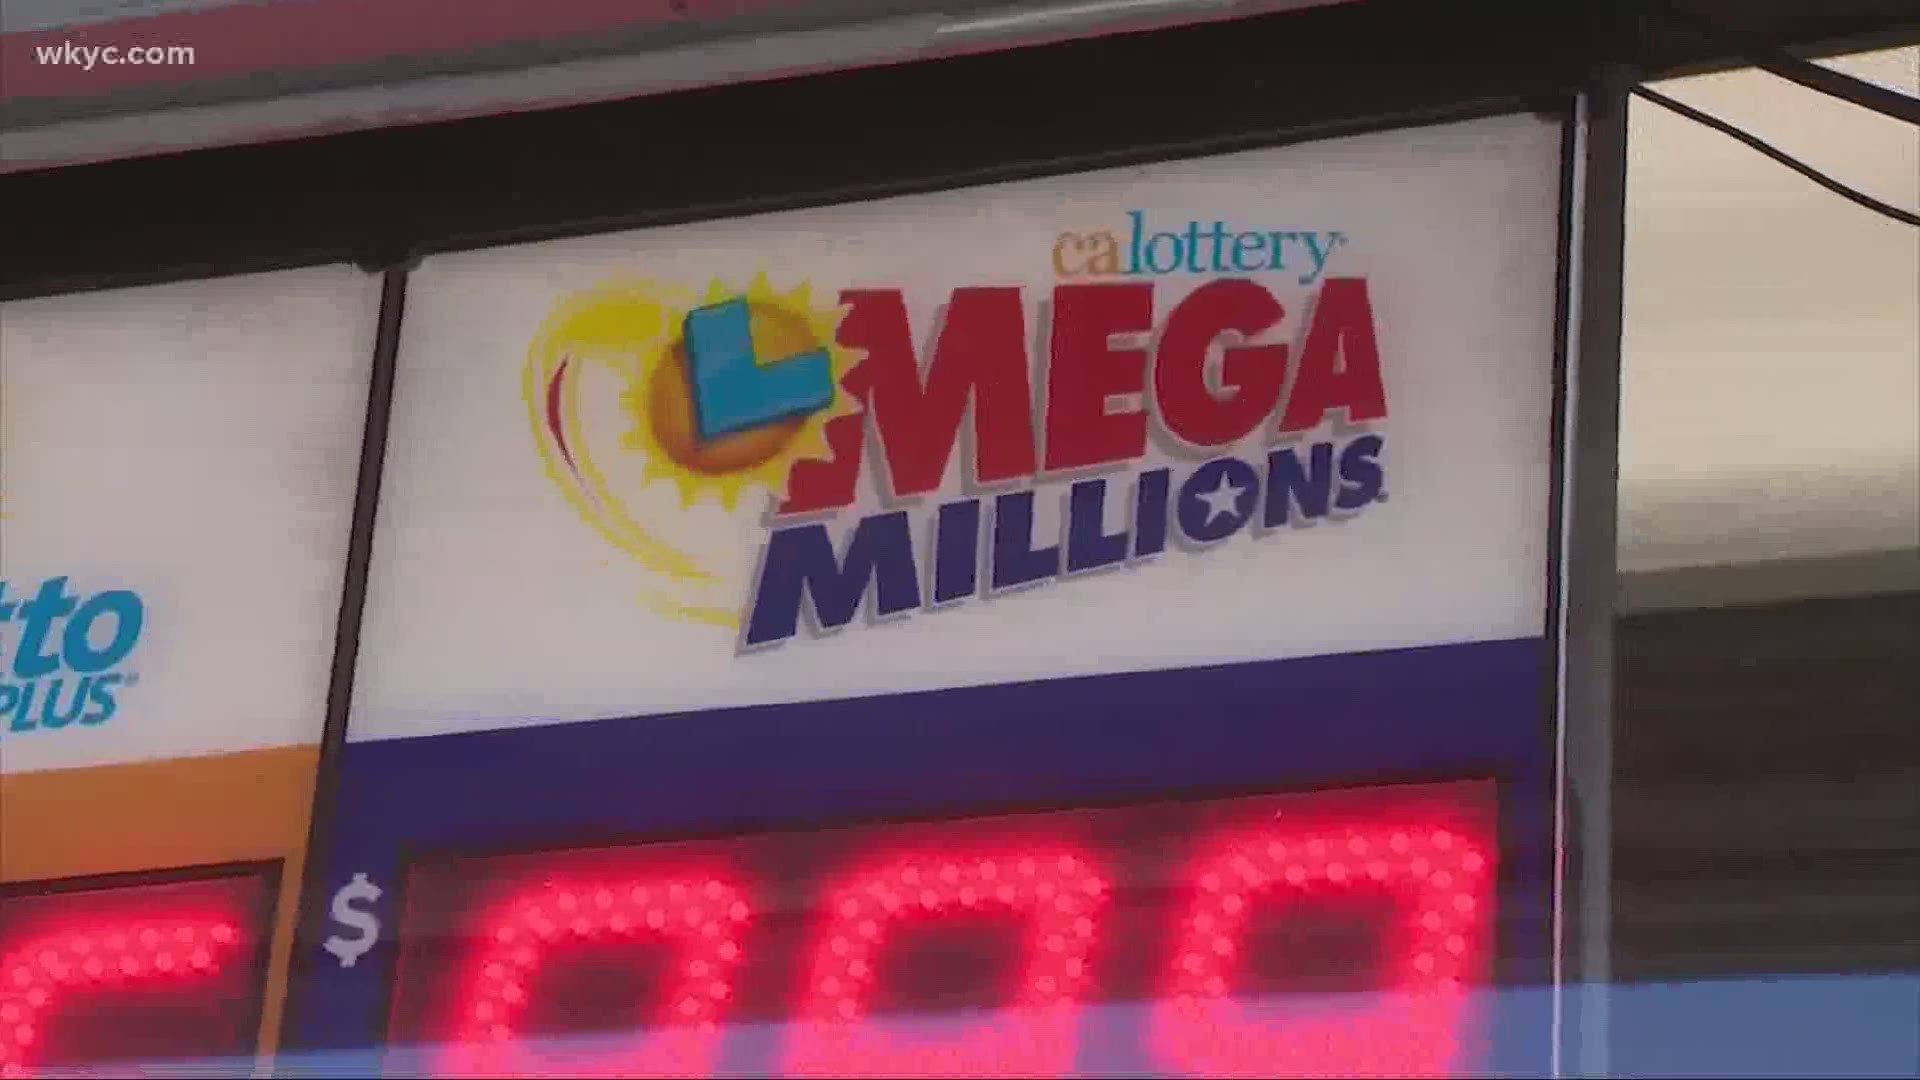 June 3, 2020: Lottery officials say a $1 million winning ticket in Tuesday night’s Mega Millions drawing was sold in Twinsburg at Twinsburg Beverage. Congrats!